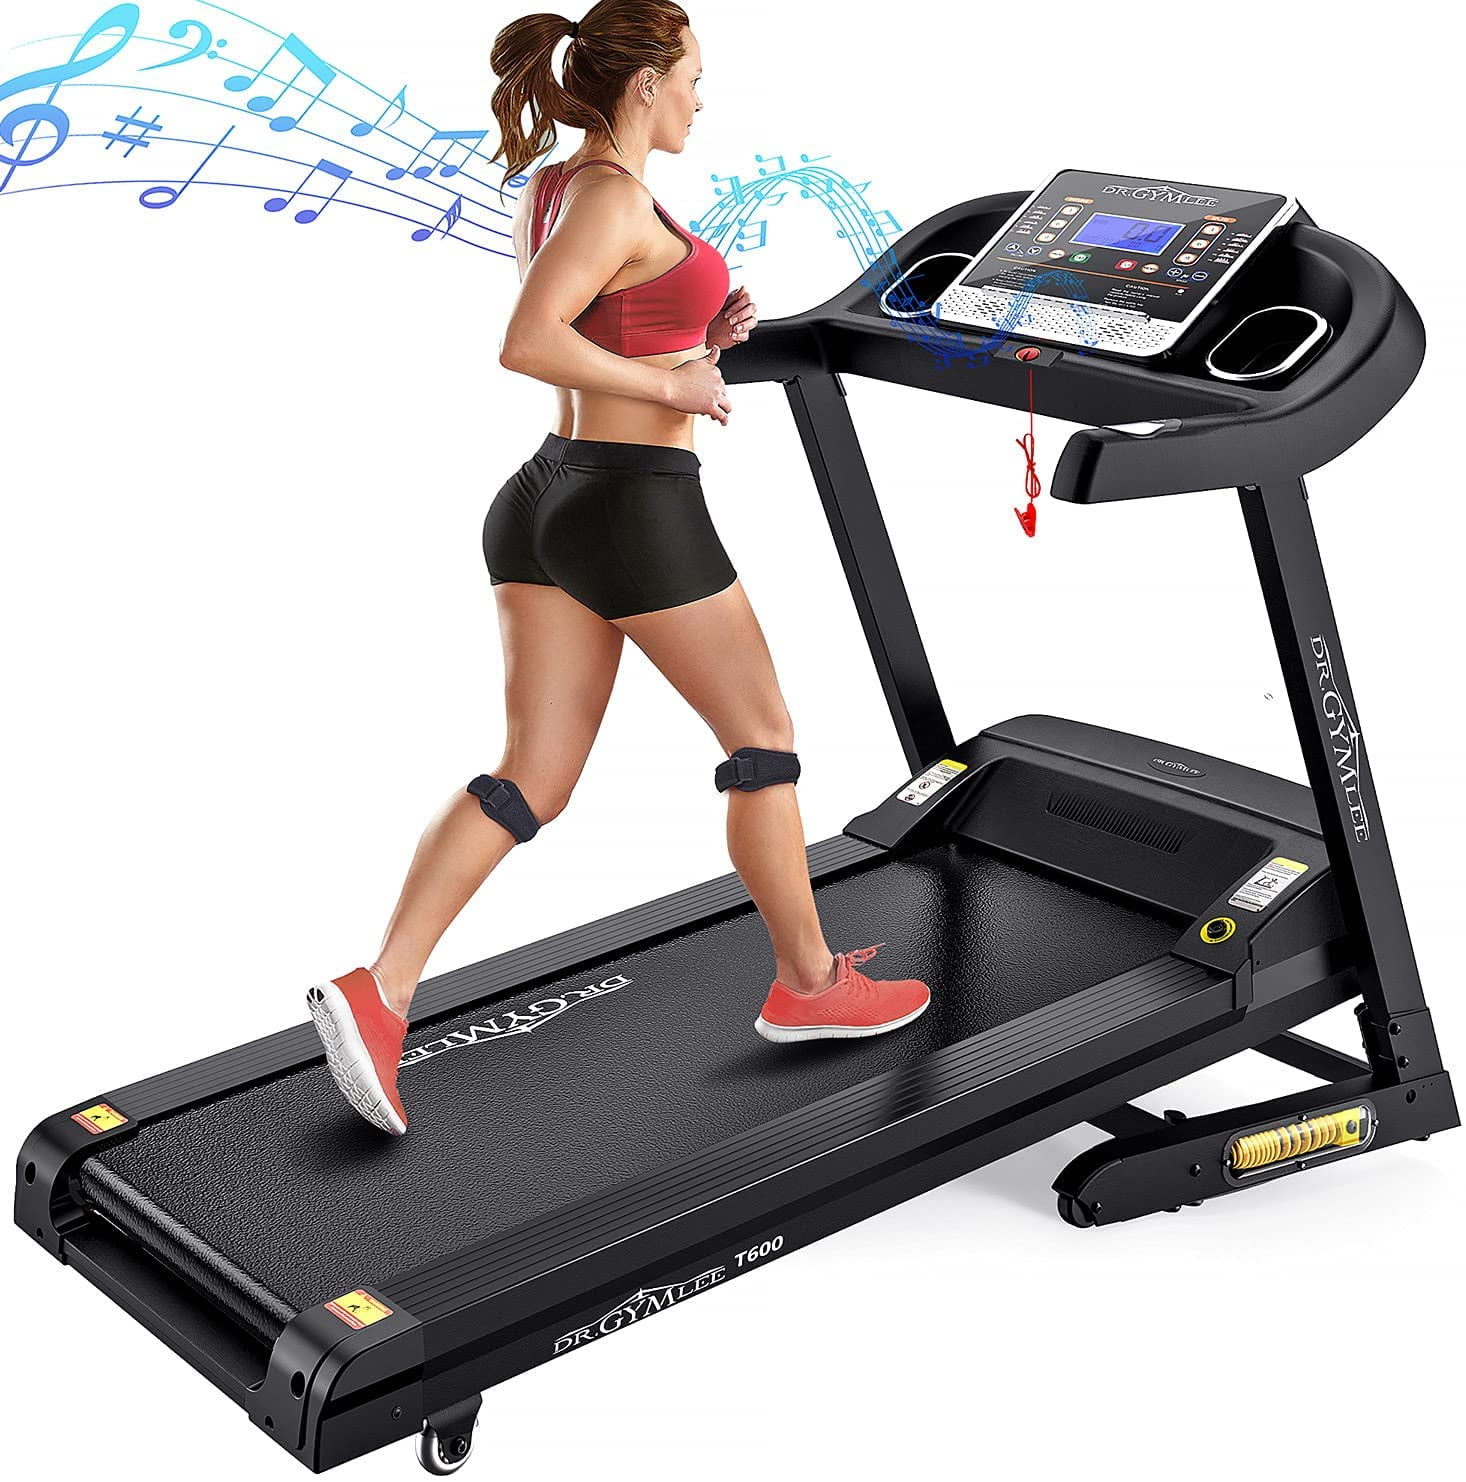 Details about   3HP Folding Treadmill Home/Gym Motorized Fitness Running Machine 300LB Capacity 